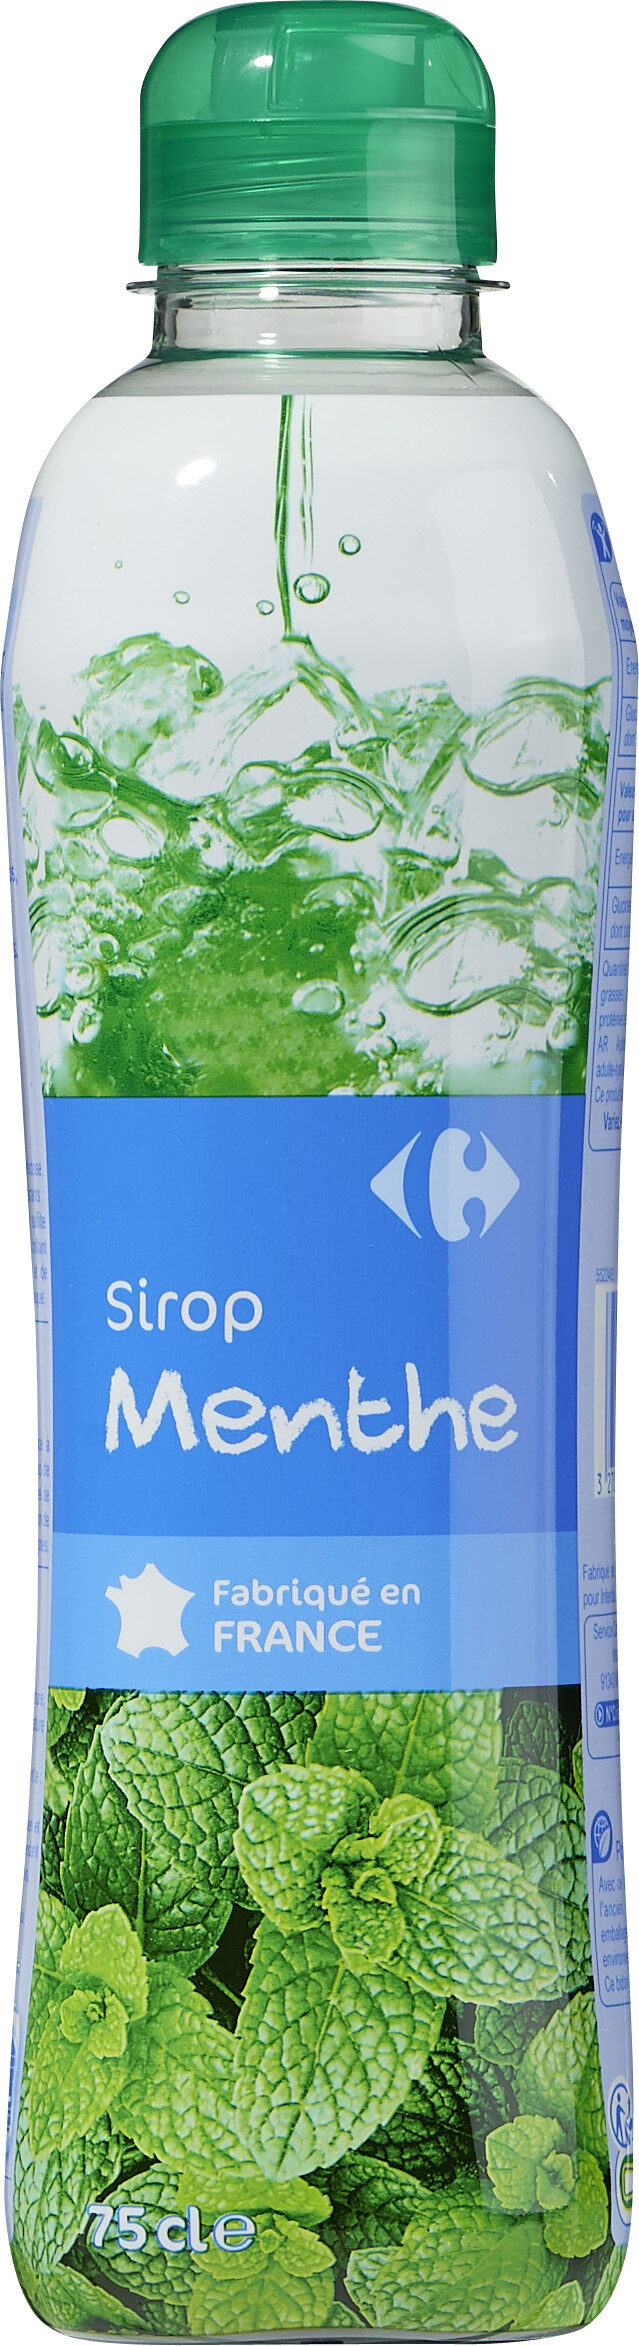 sirop - Product - fr